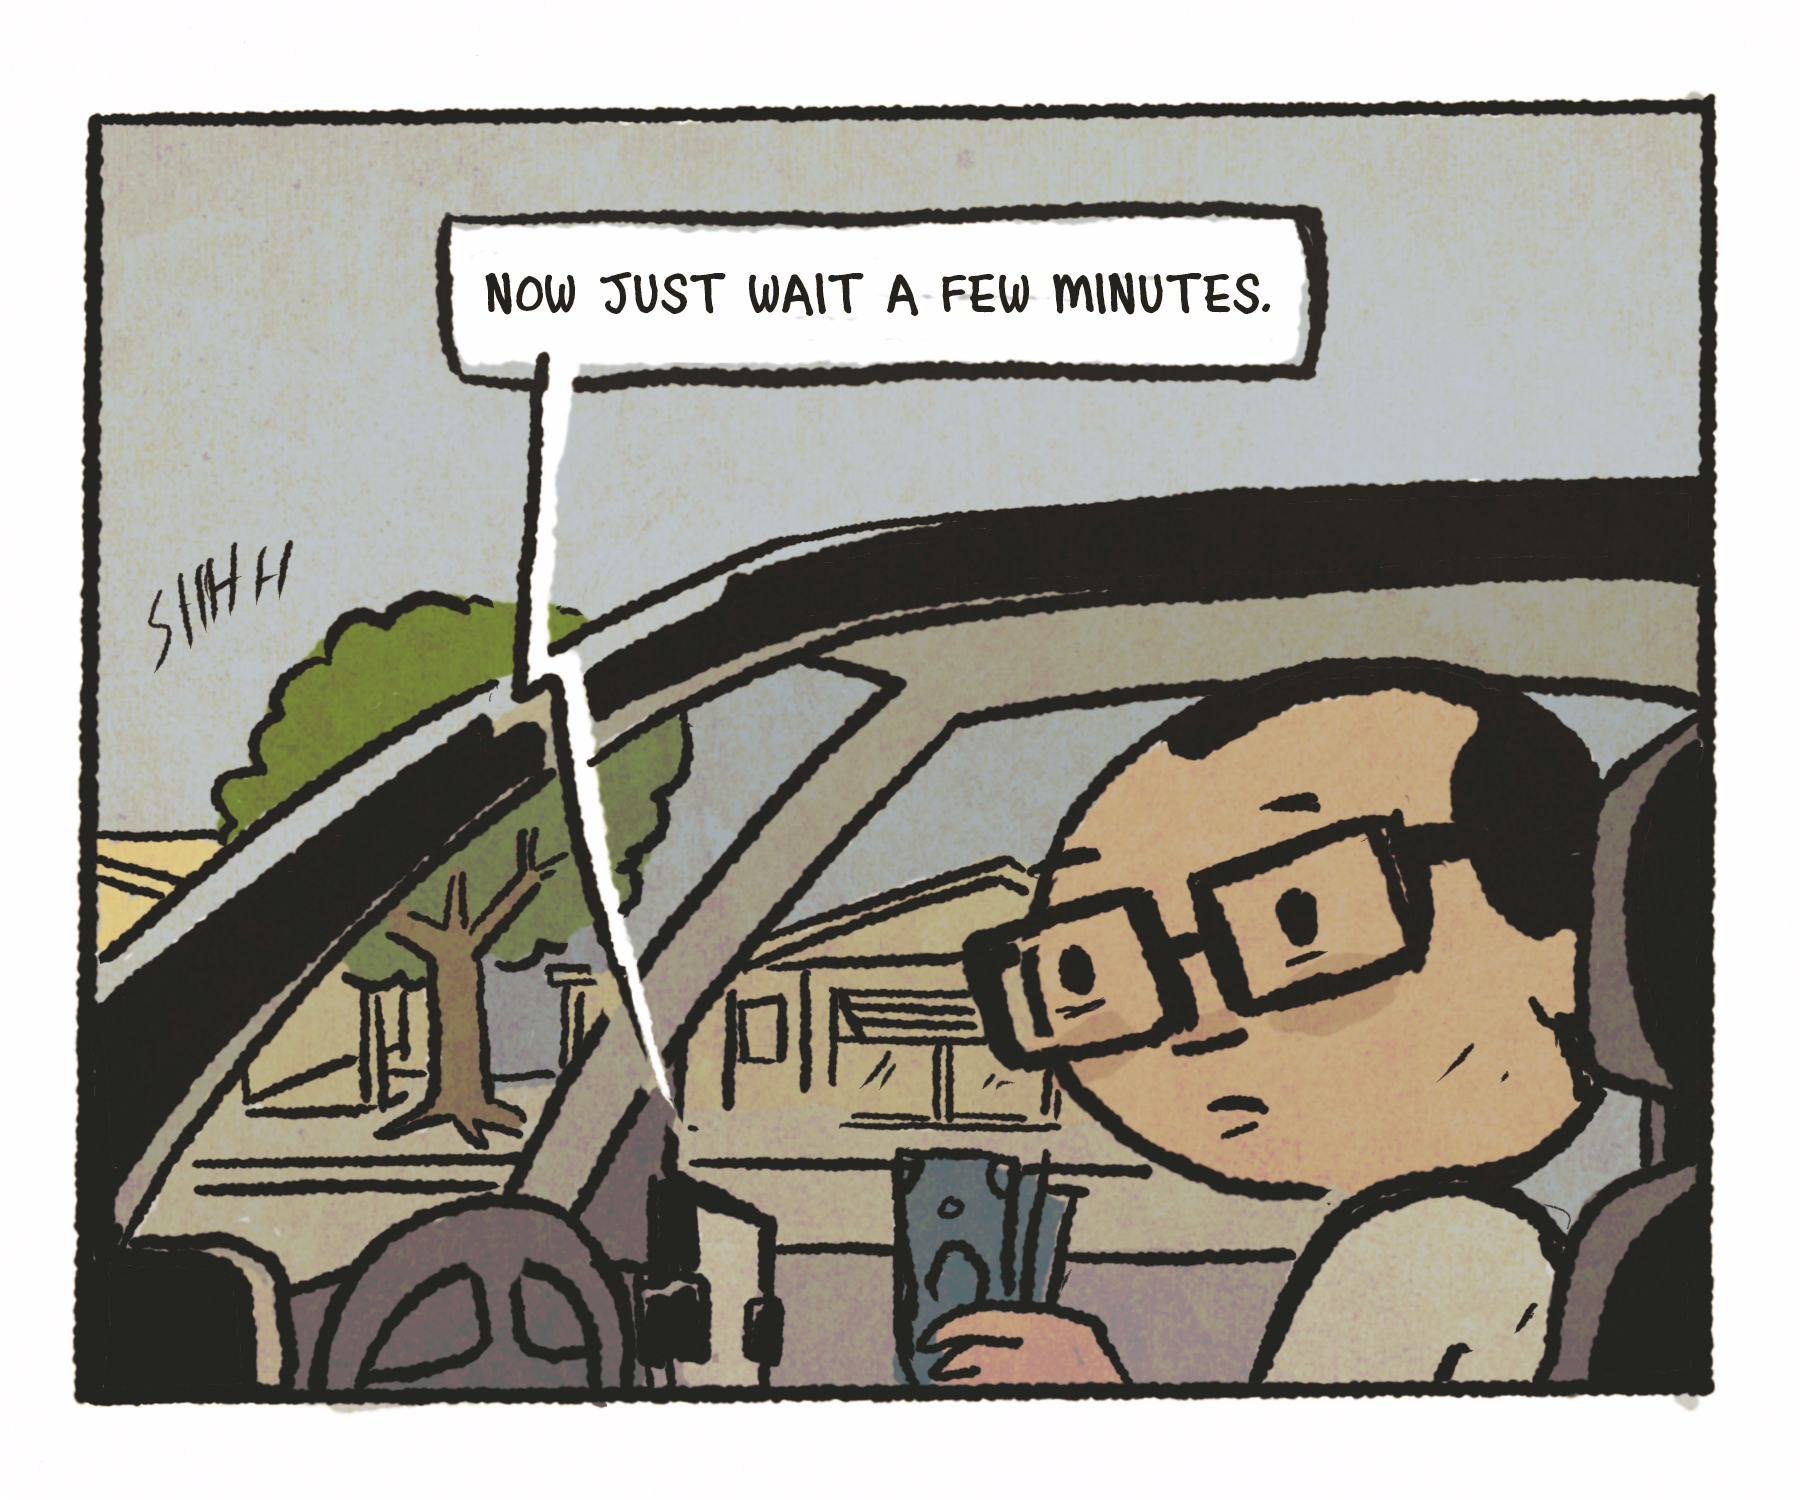 Comics panel: The man continues to wait inside his parked car. Speech bubble: "Now just wait a few minutes."